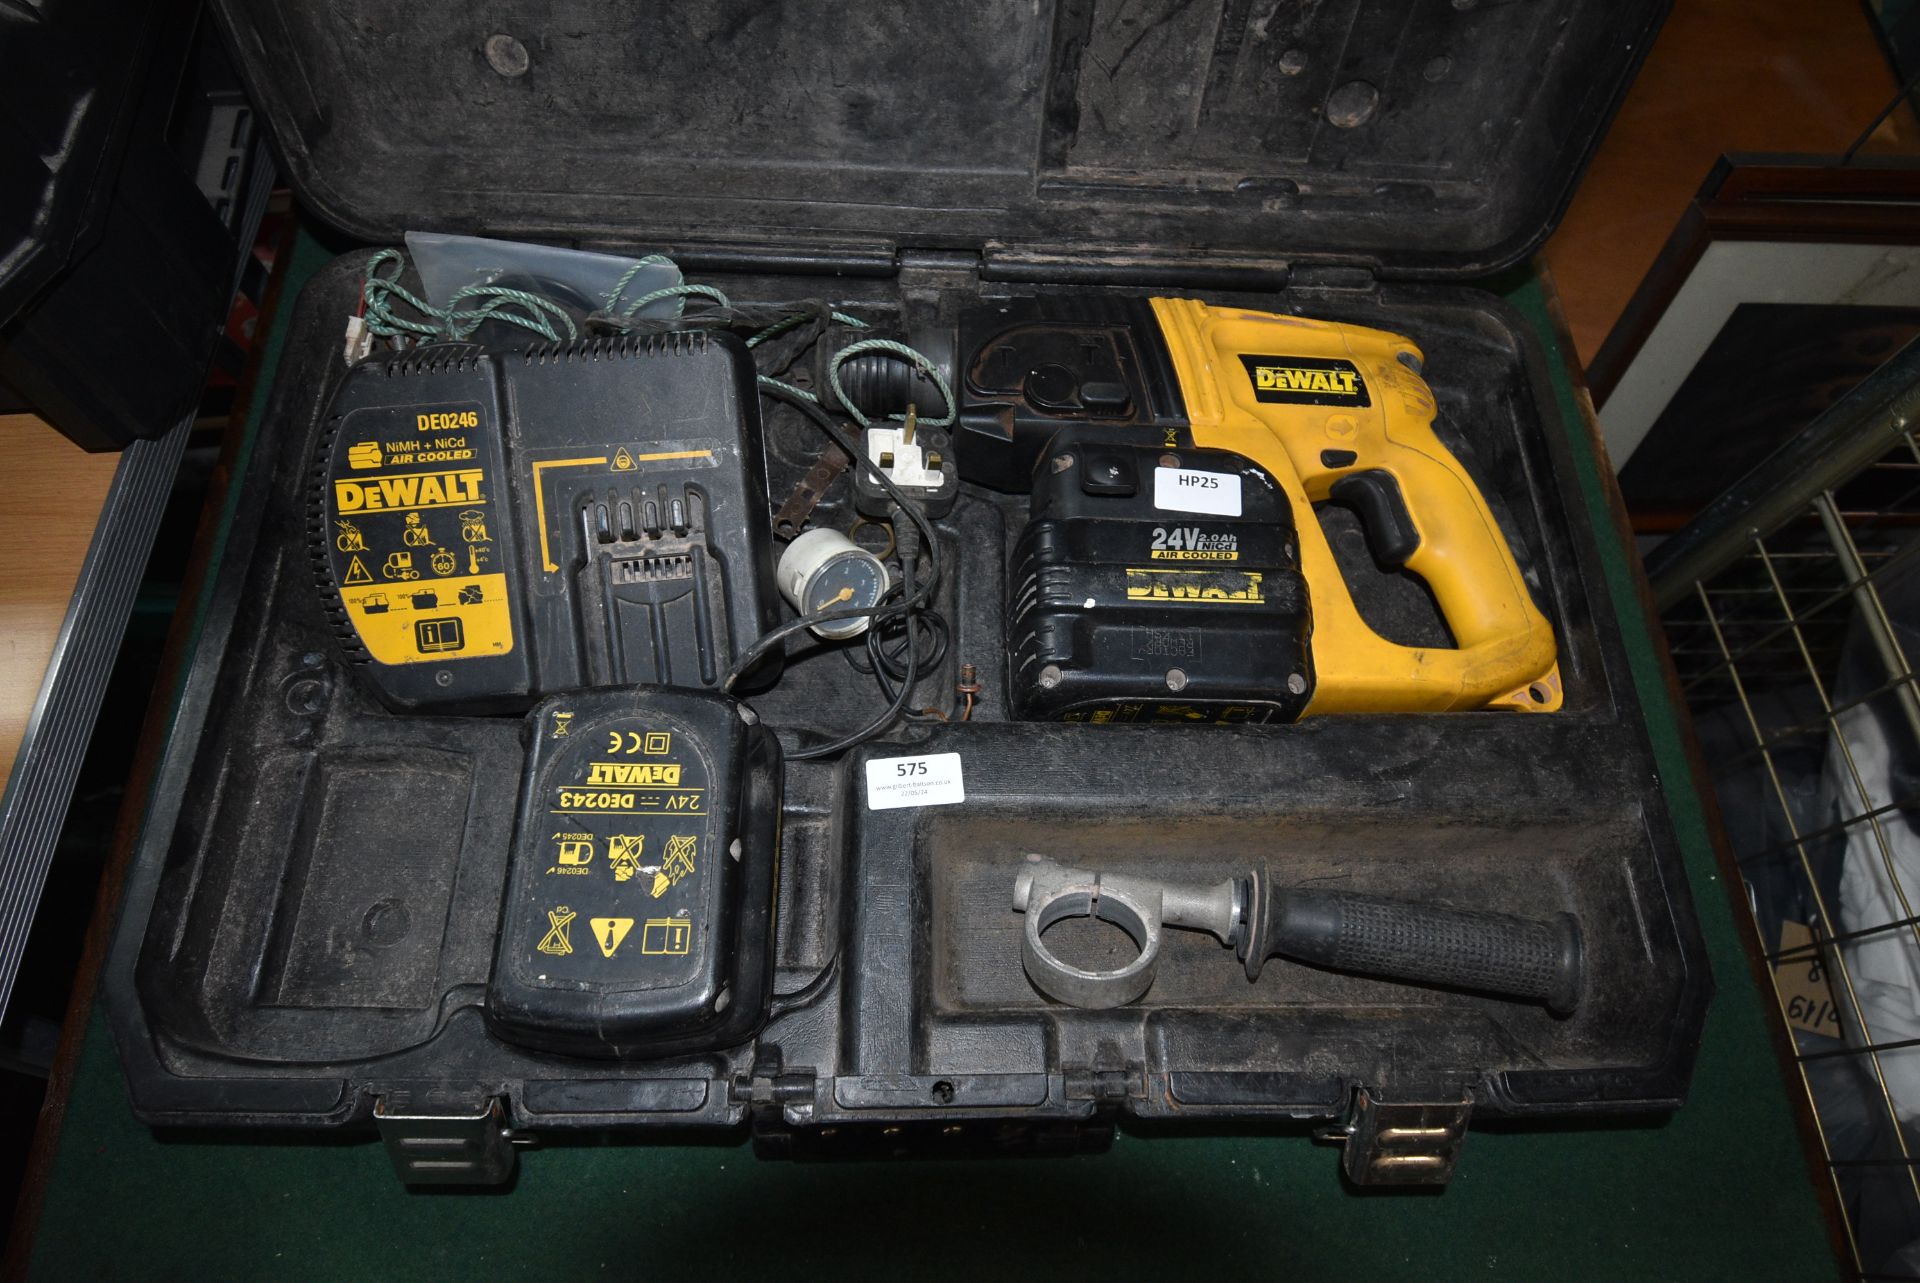 Dewalt DW005 SDS Drill with Charger, Two Batteries, and Case